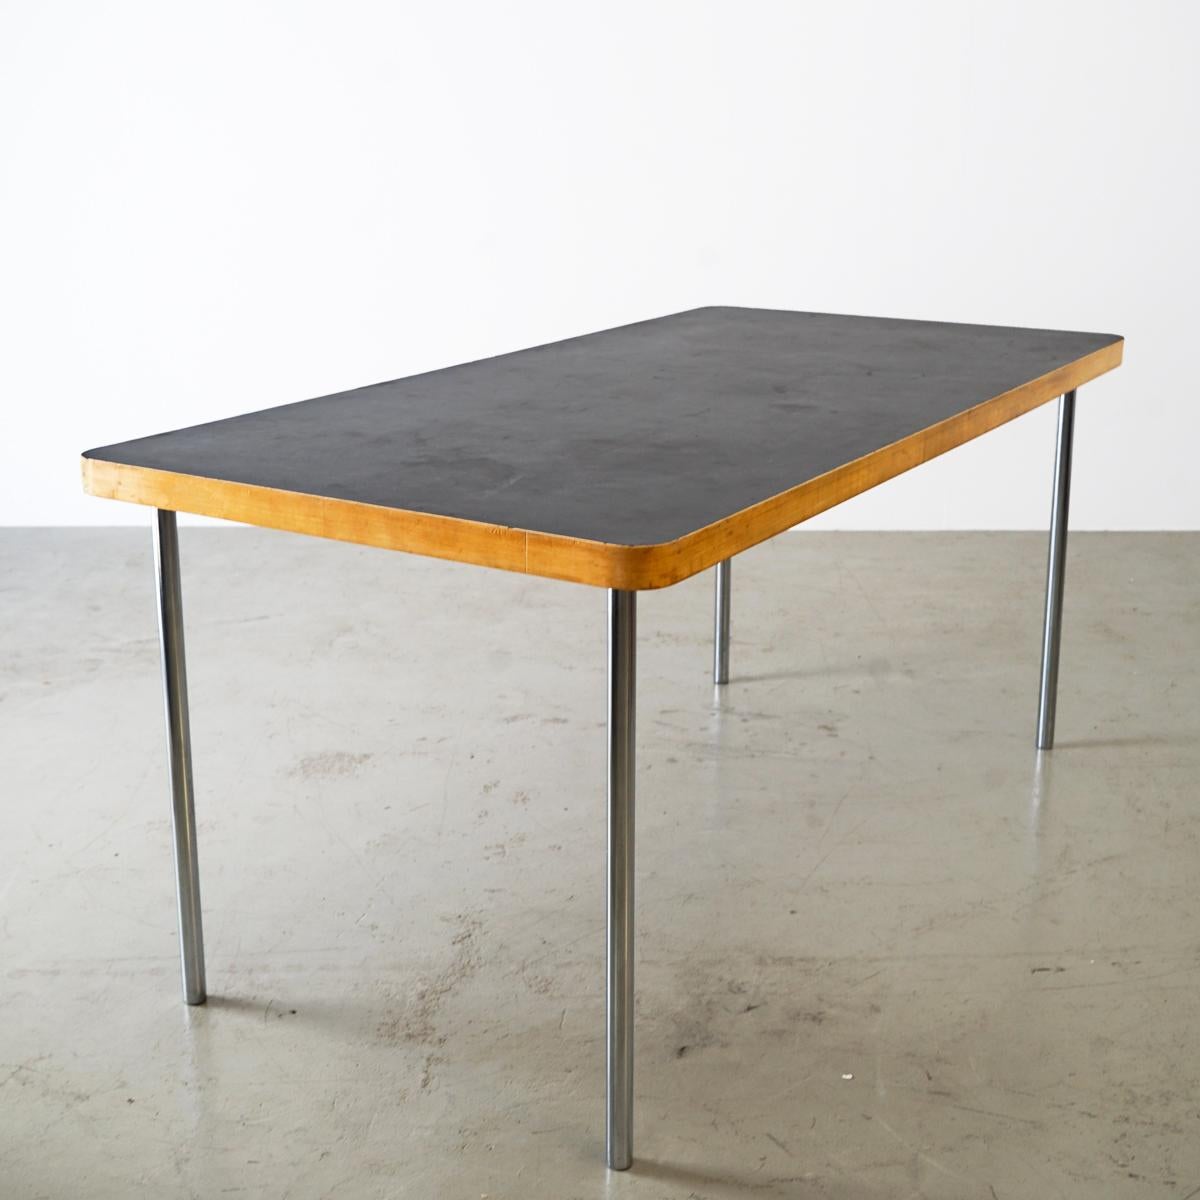 This original dining table, designed by the Hungarian designer and architect Marcel Breuer for Embru, Switzerland, is a very rare classical piece in the design history. Marcel Breuer is classified as the innovator of the furniture with a steel tube